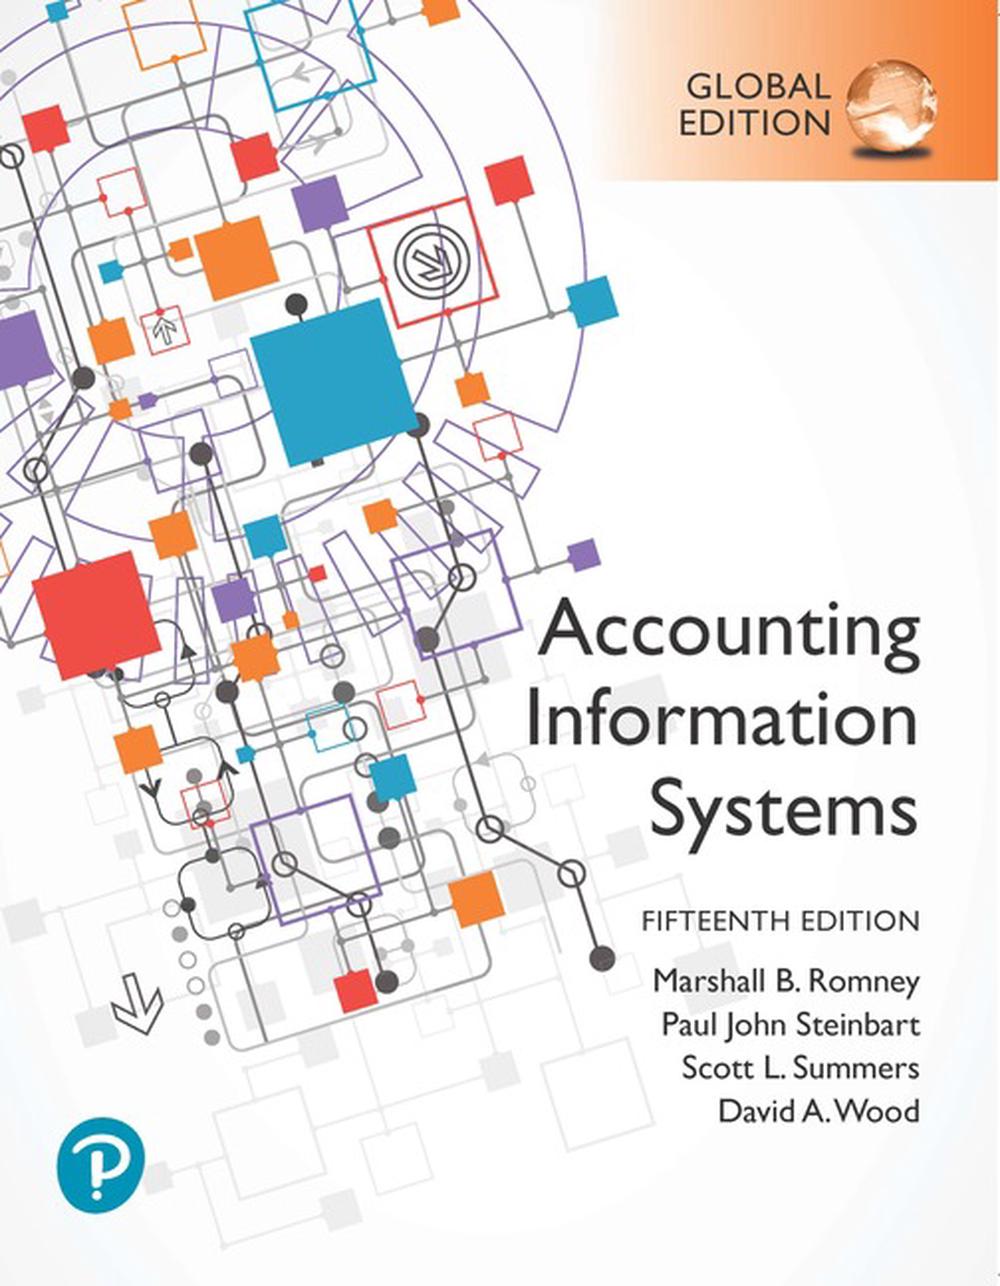 article review of accounting information system